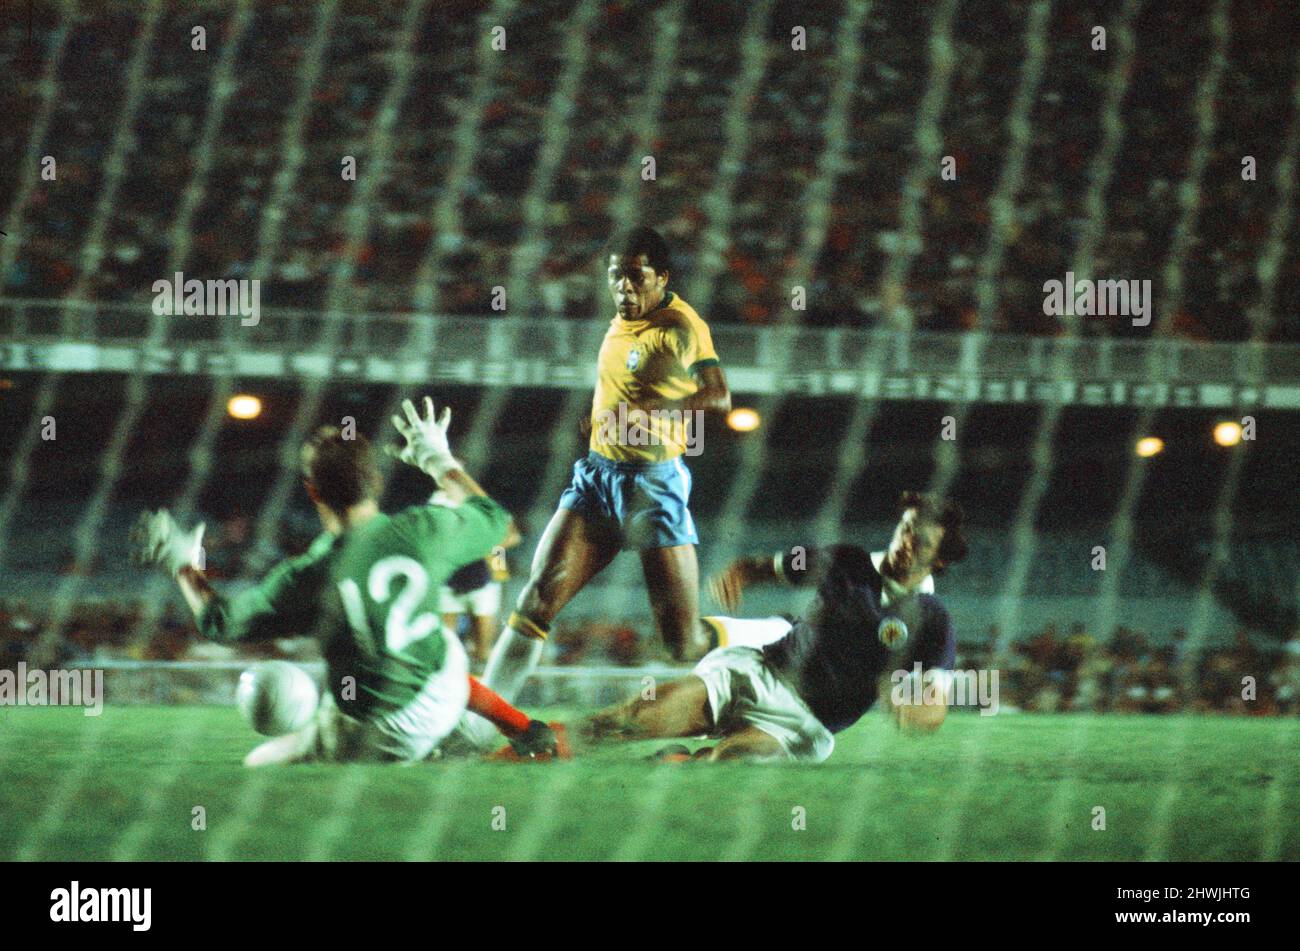 Brazil 1-0 Scotland, 1972 Brazil Independence Cup, final stage, Group A match at the Estadio do Maracana, Rio de Janeiro, Brazil, Wednesday 5th July 1972. Pictured, Dario of Brazil shoots at goal faced by Scottish goalkeeper Bobby Clark. Stock Photo